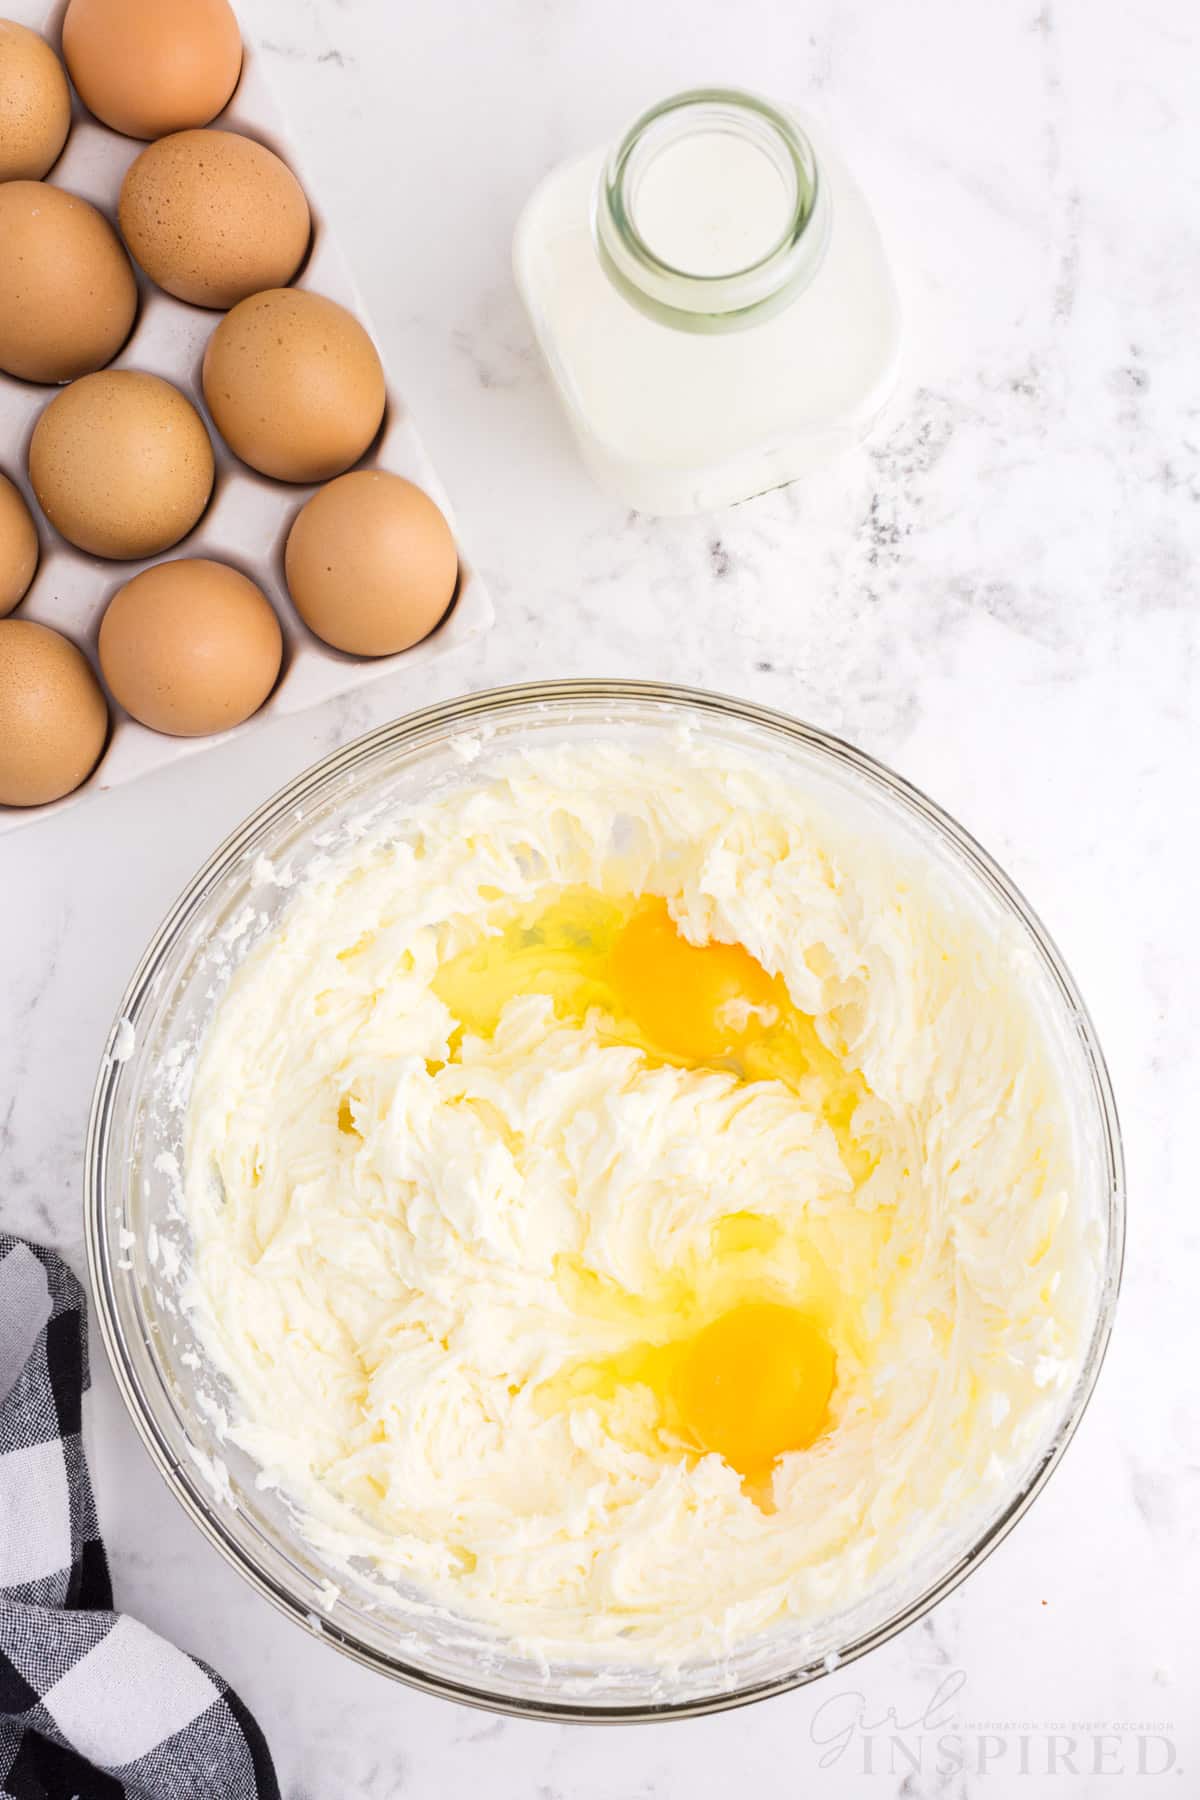 Bowl with cream cheese, sugar, and eggs, checkered linen, tray of eggs, jug of milk, on a marble countertop.